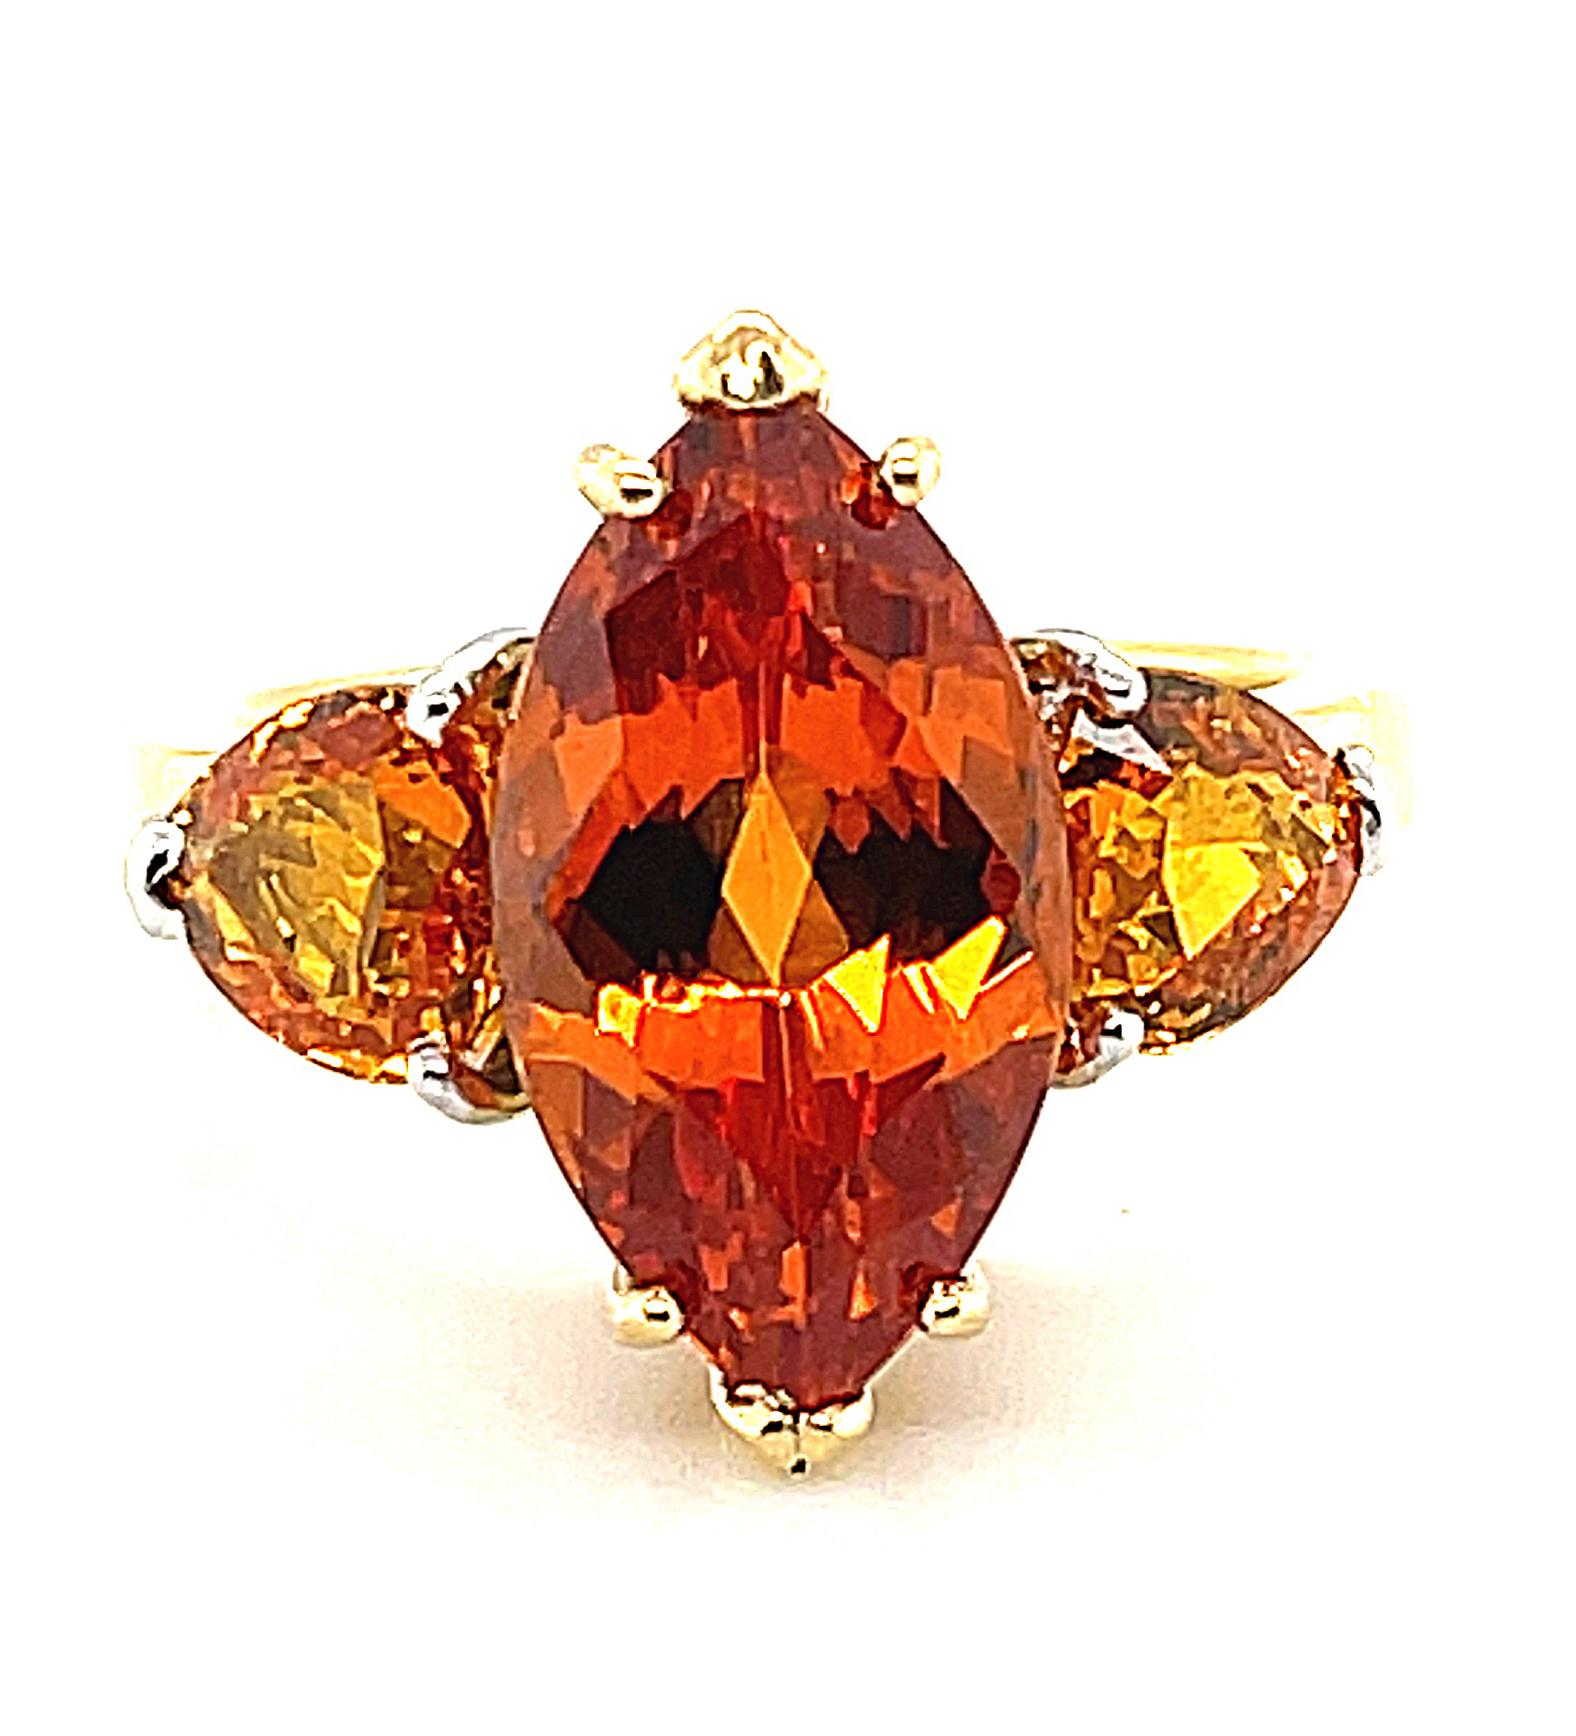 This is a fresh, citrus-colored twist on the classic 3-stone ring! A stunning and exceptionally vibrant Mandarin orange spessartine garnet has been paired with two sparkling trilliant-cut yellow orange sapphires in a head-turning orange-lemon